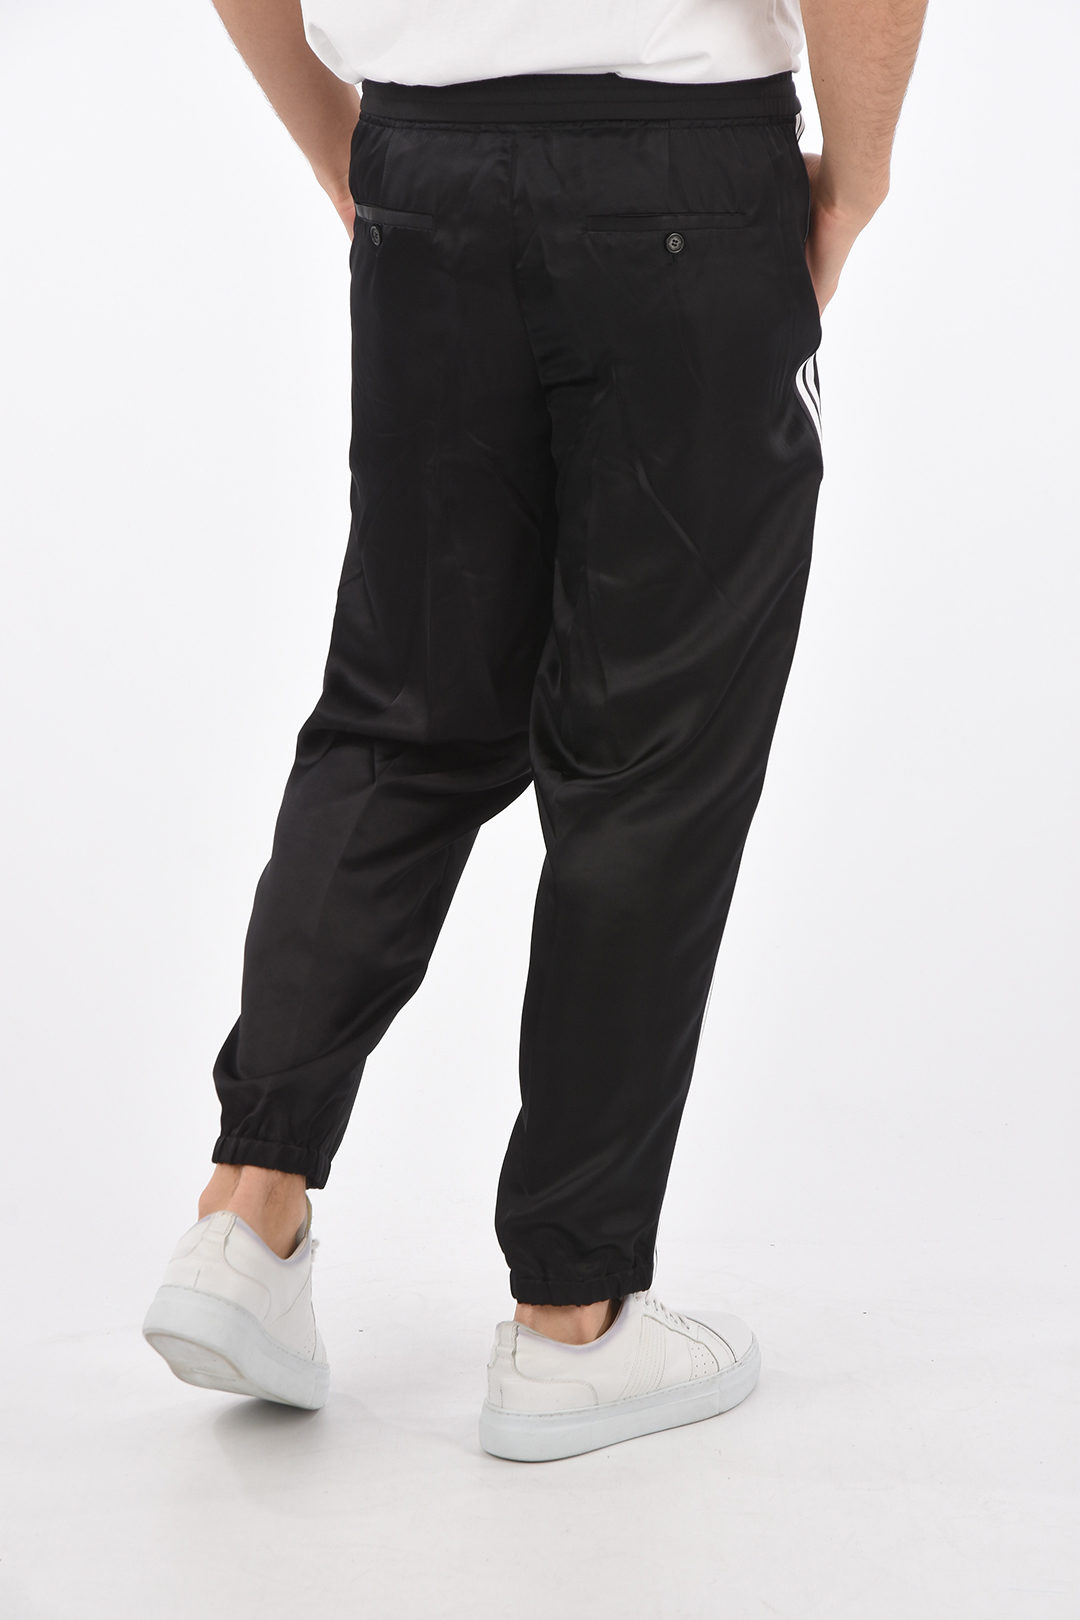 Neil Barrett easy fit piping pants men - Glamood Outlet